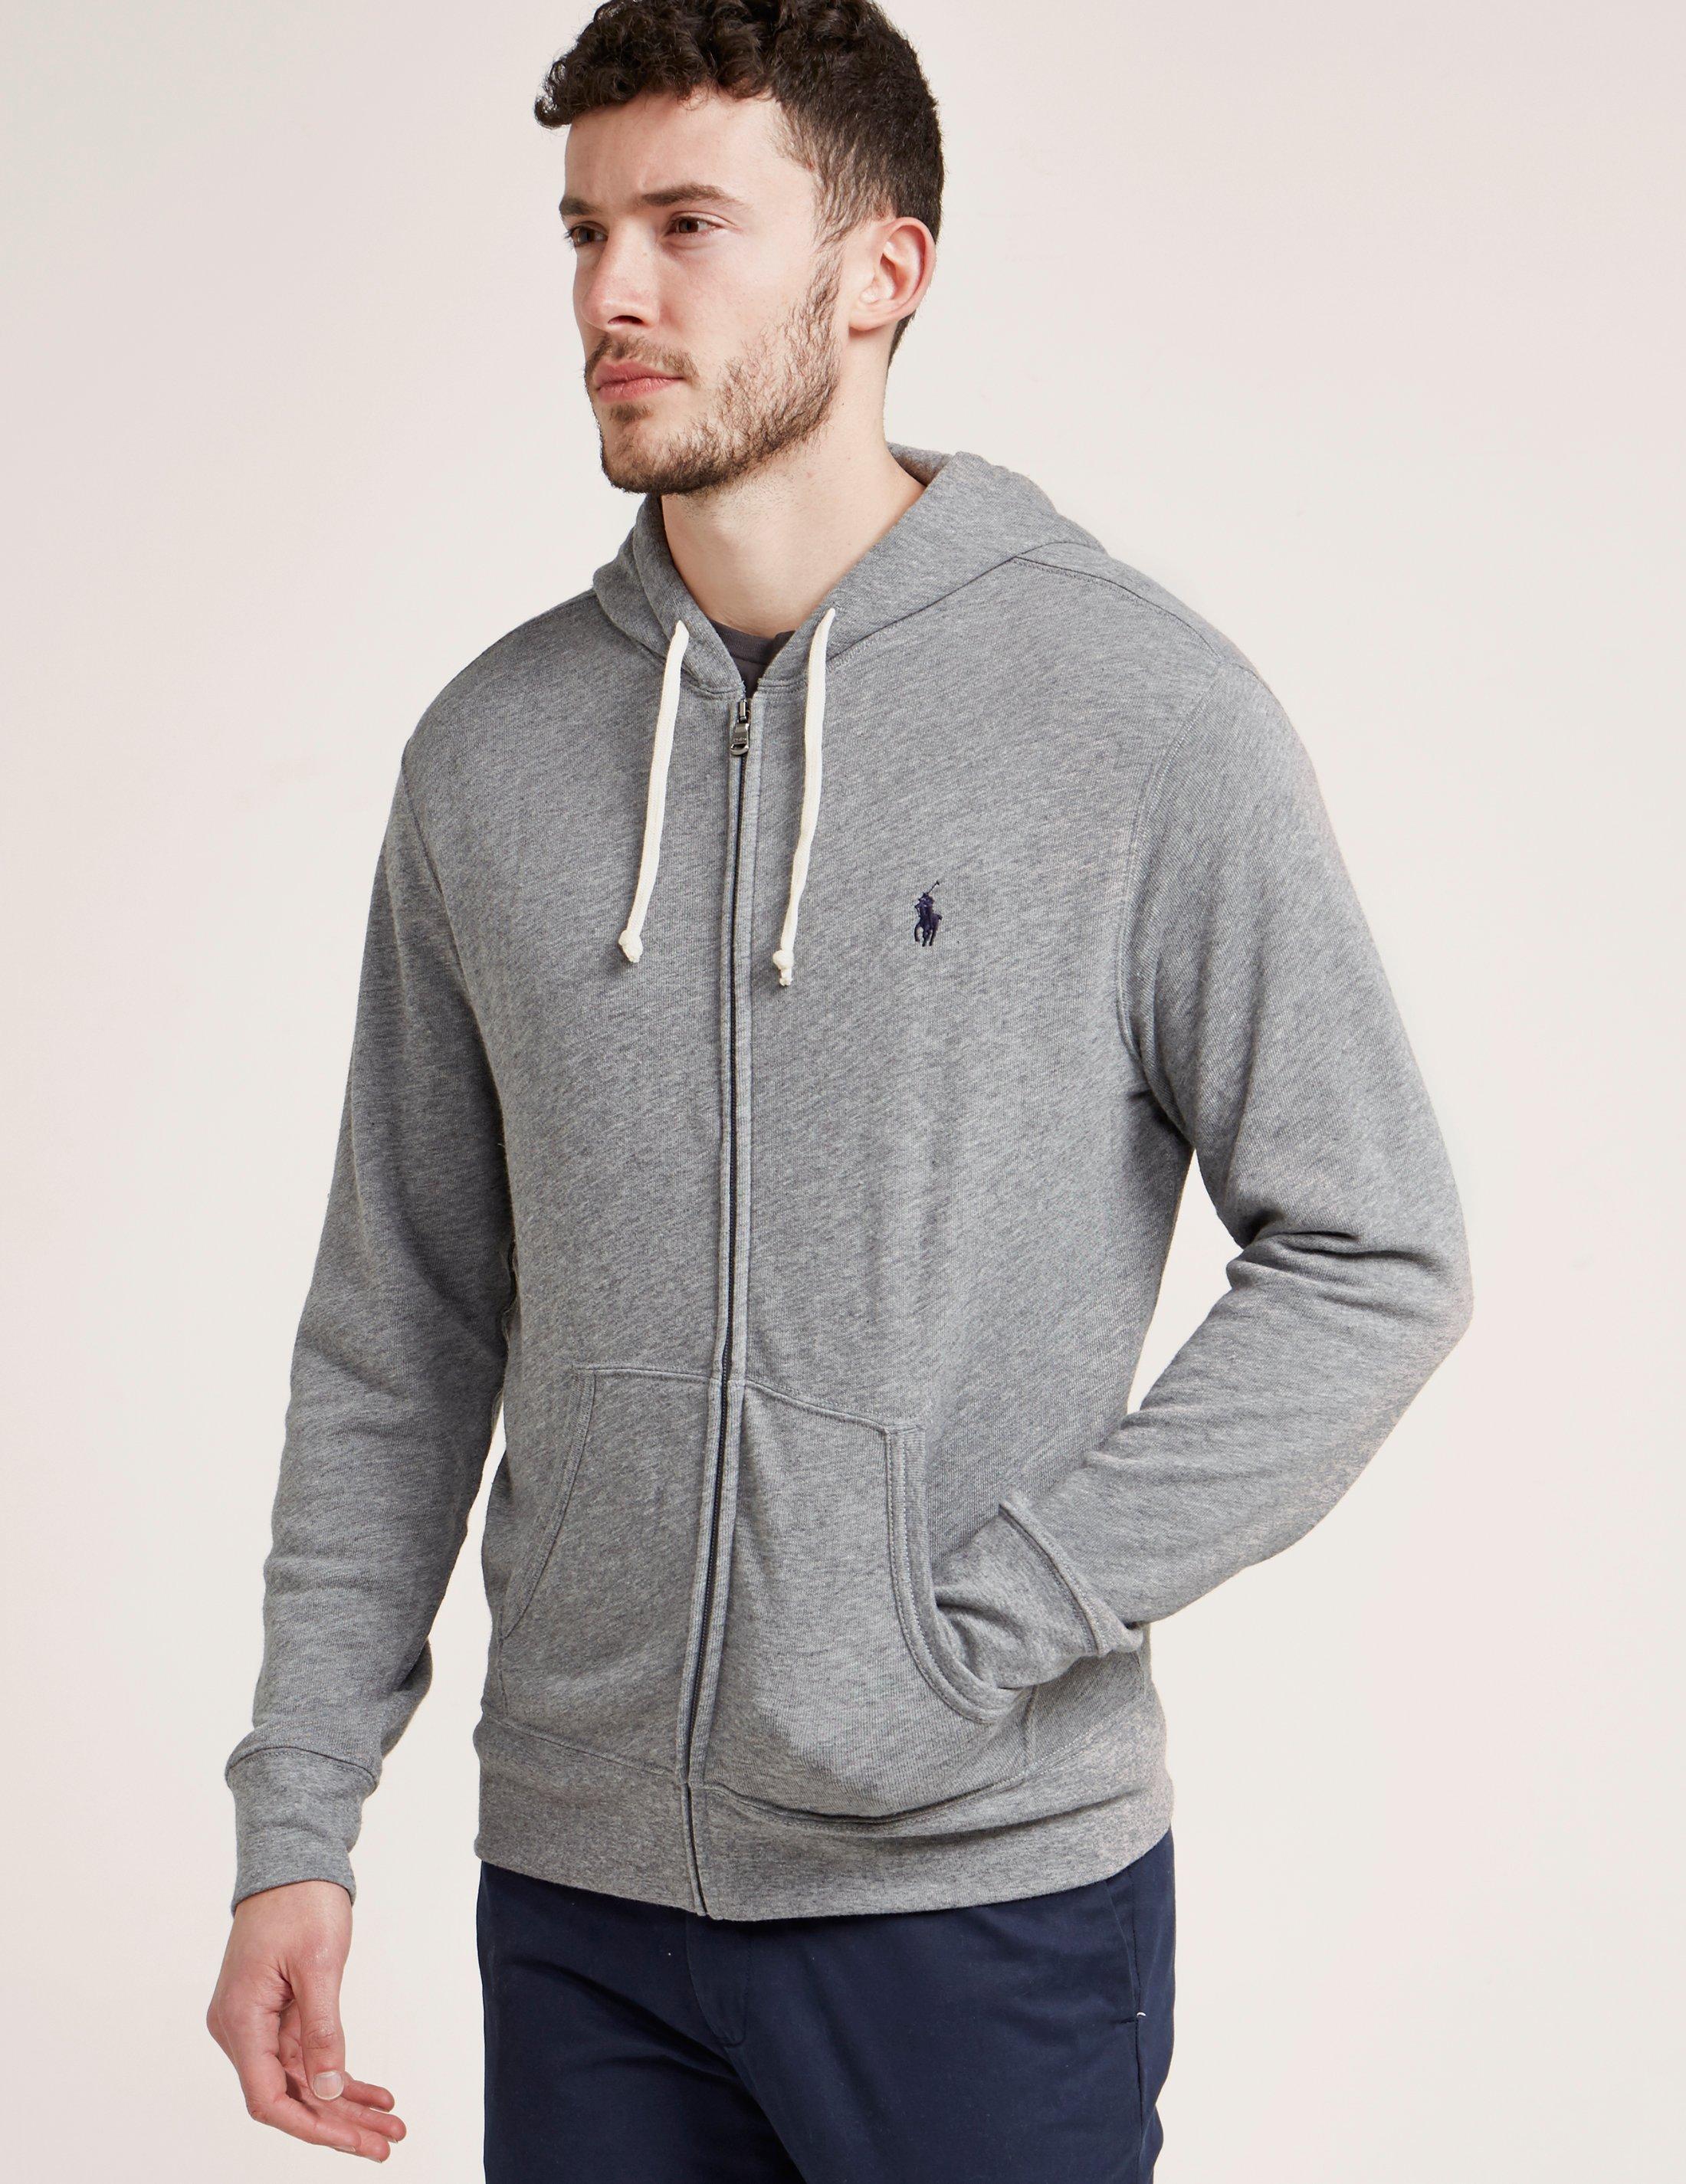 Lyst - Polo Ralph Lauren French Terry Hoody in Gray for Men